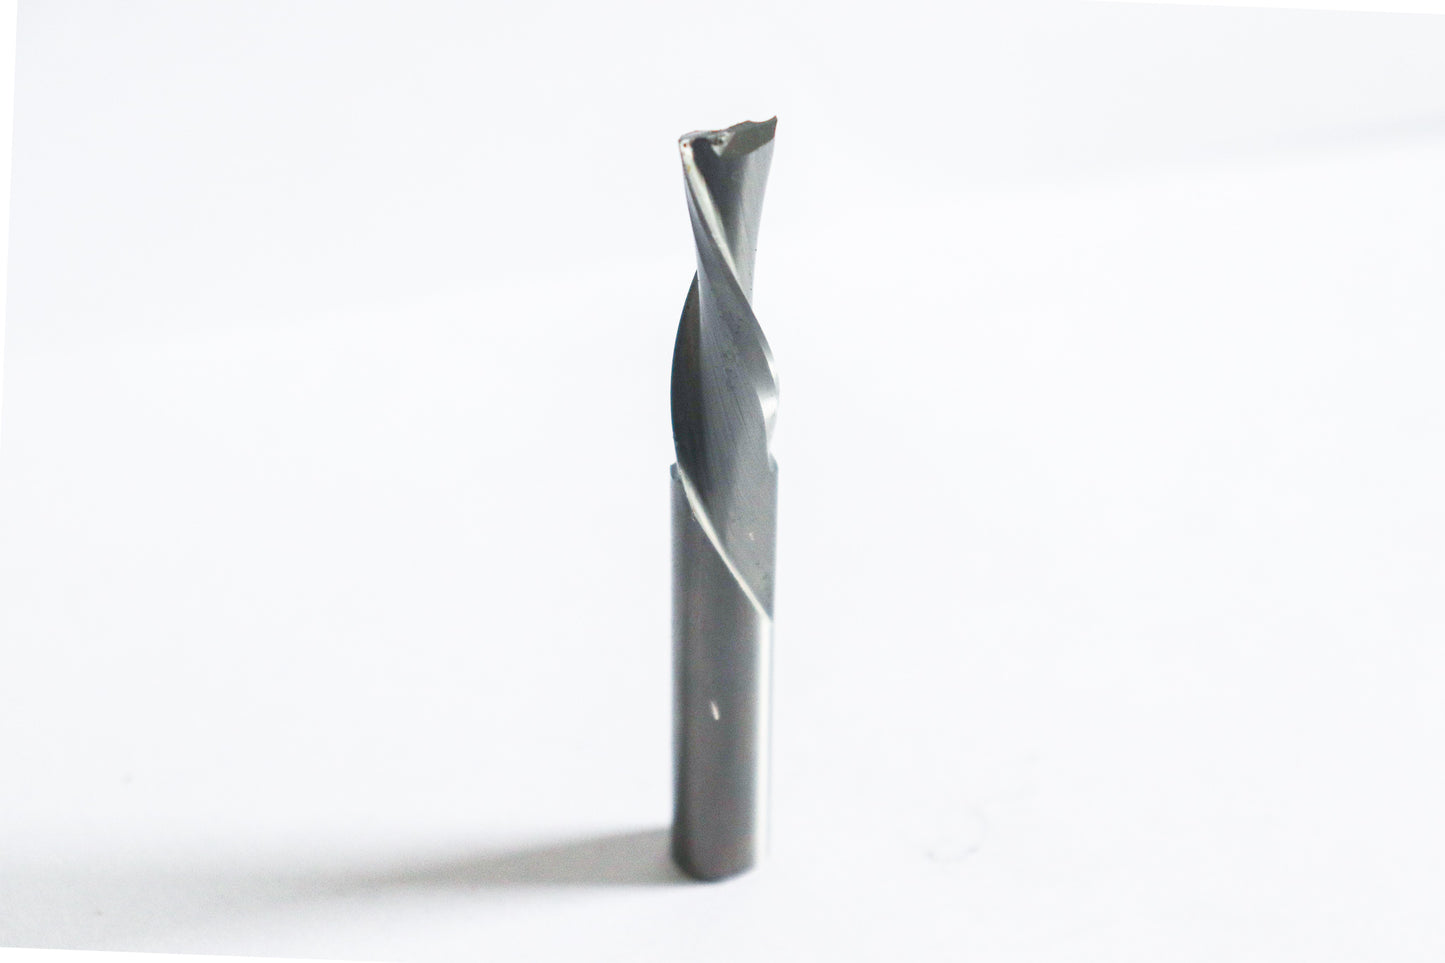 045-1648RX: 2FL Sprial Upcut; 1/2"SH; 1/2"CD; 1-1/2"CL; The RX series of bits last 50% longer than other premium CNC bits.